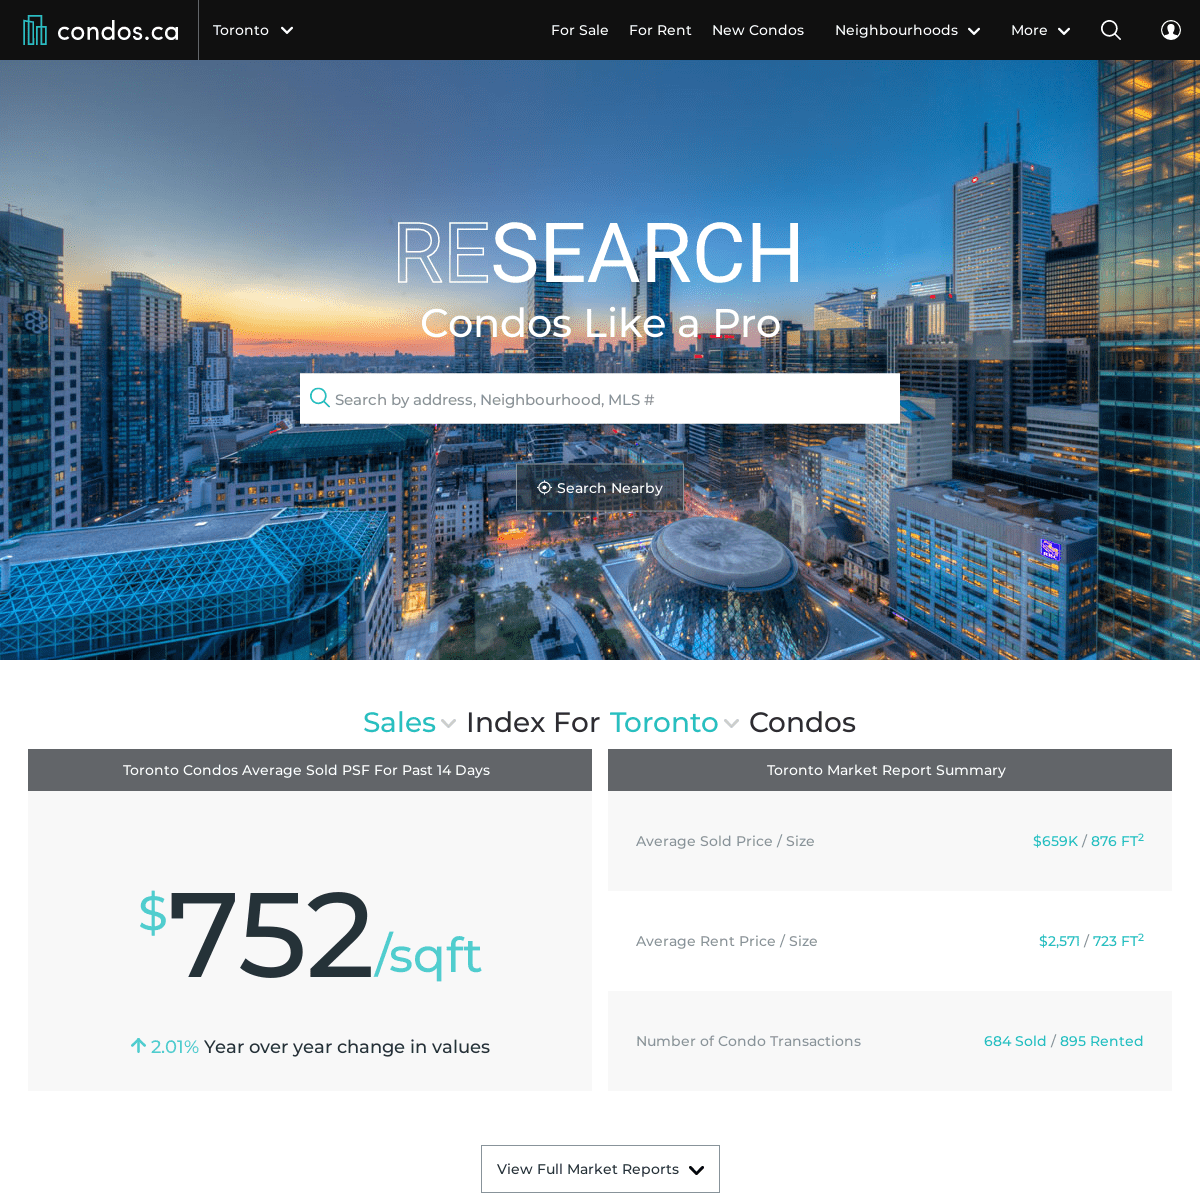 Condos.ca | Search & Analyze all Toronto Condos | Buy Sell Rent Invest